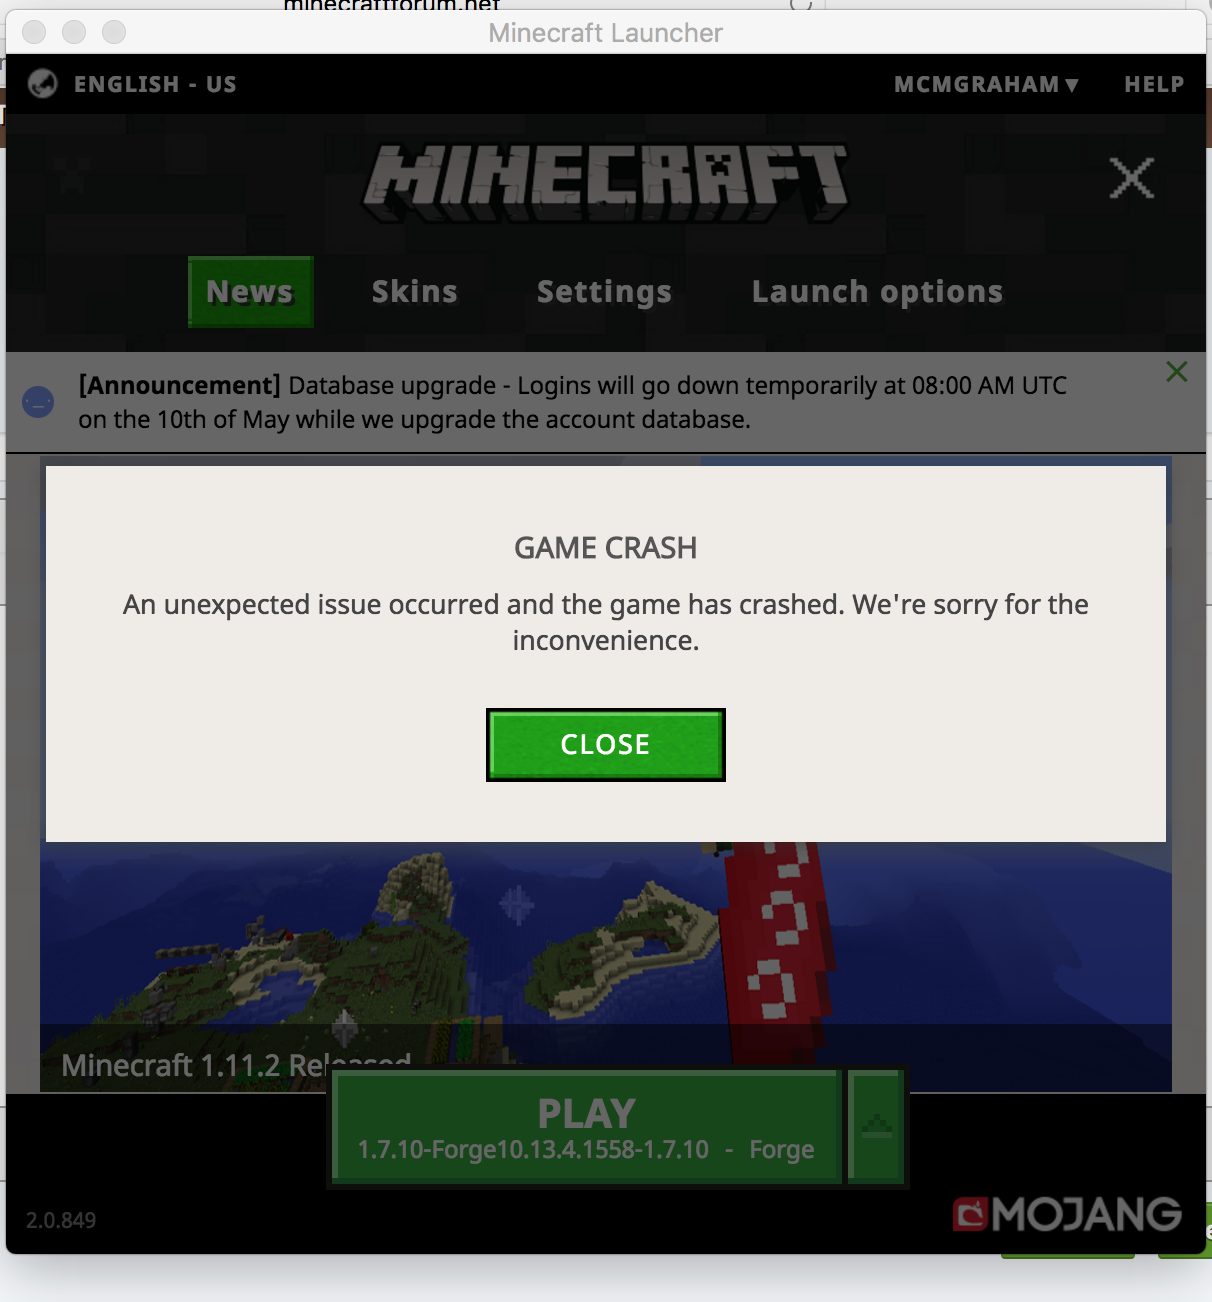 extra utilities crashes minecraft on startup after launcher update